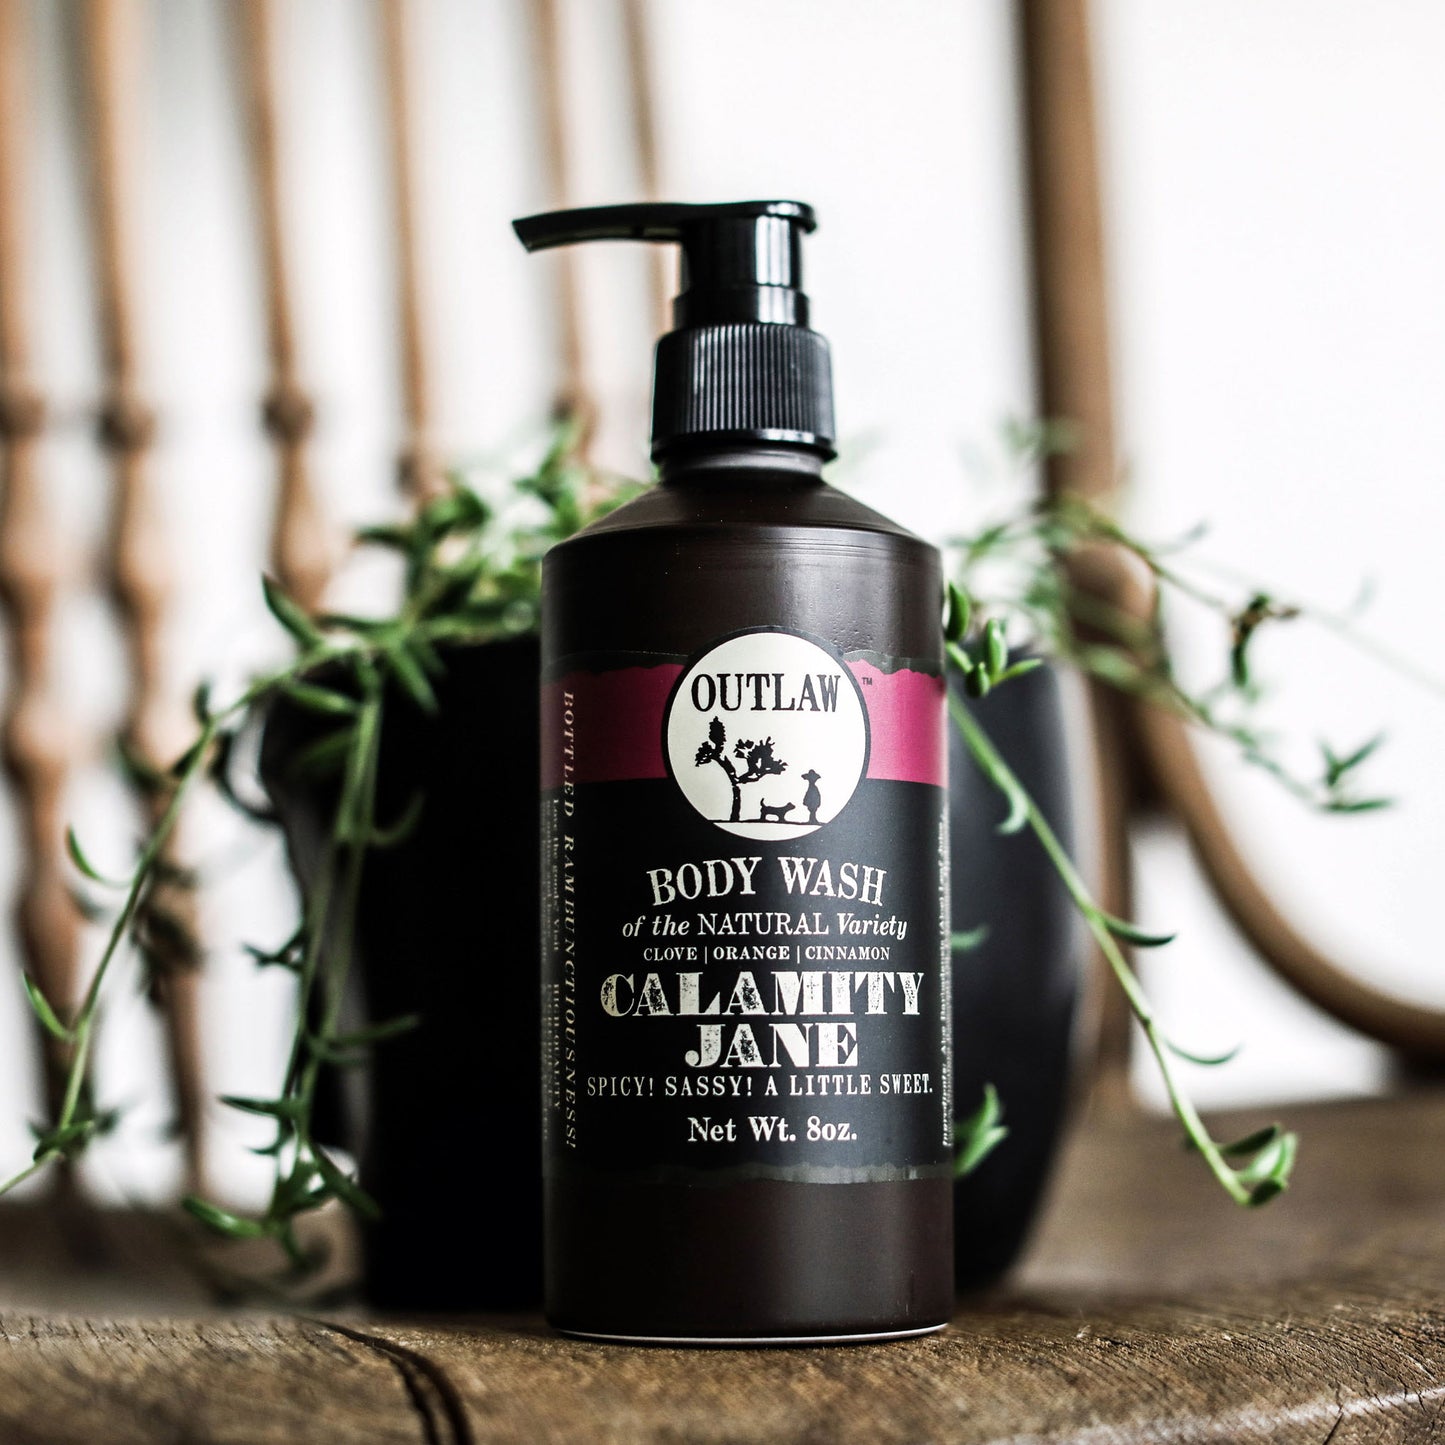 Calamity Jane natural body wash from Outlaw